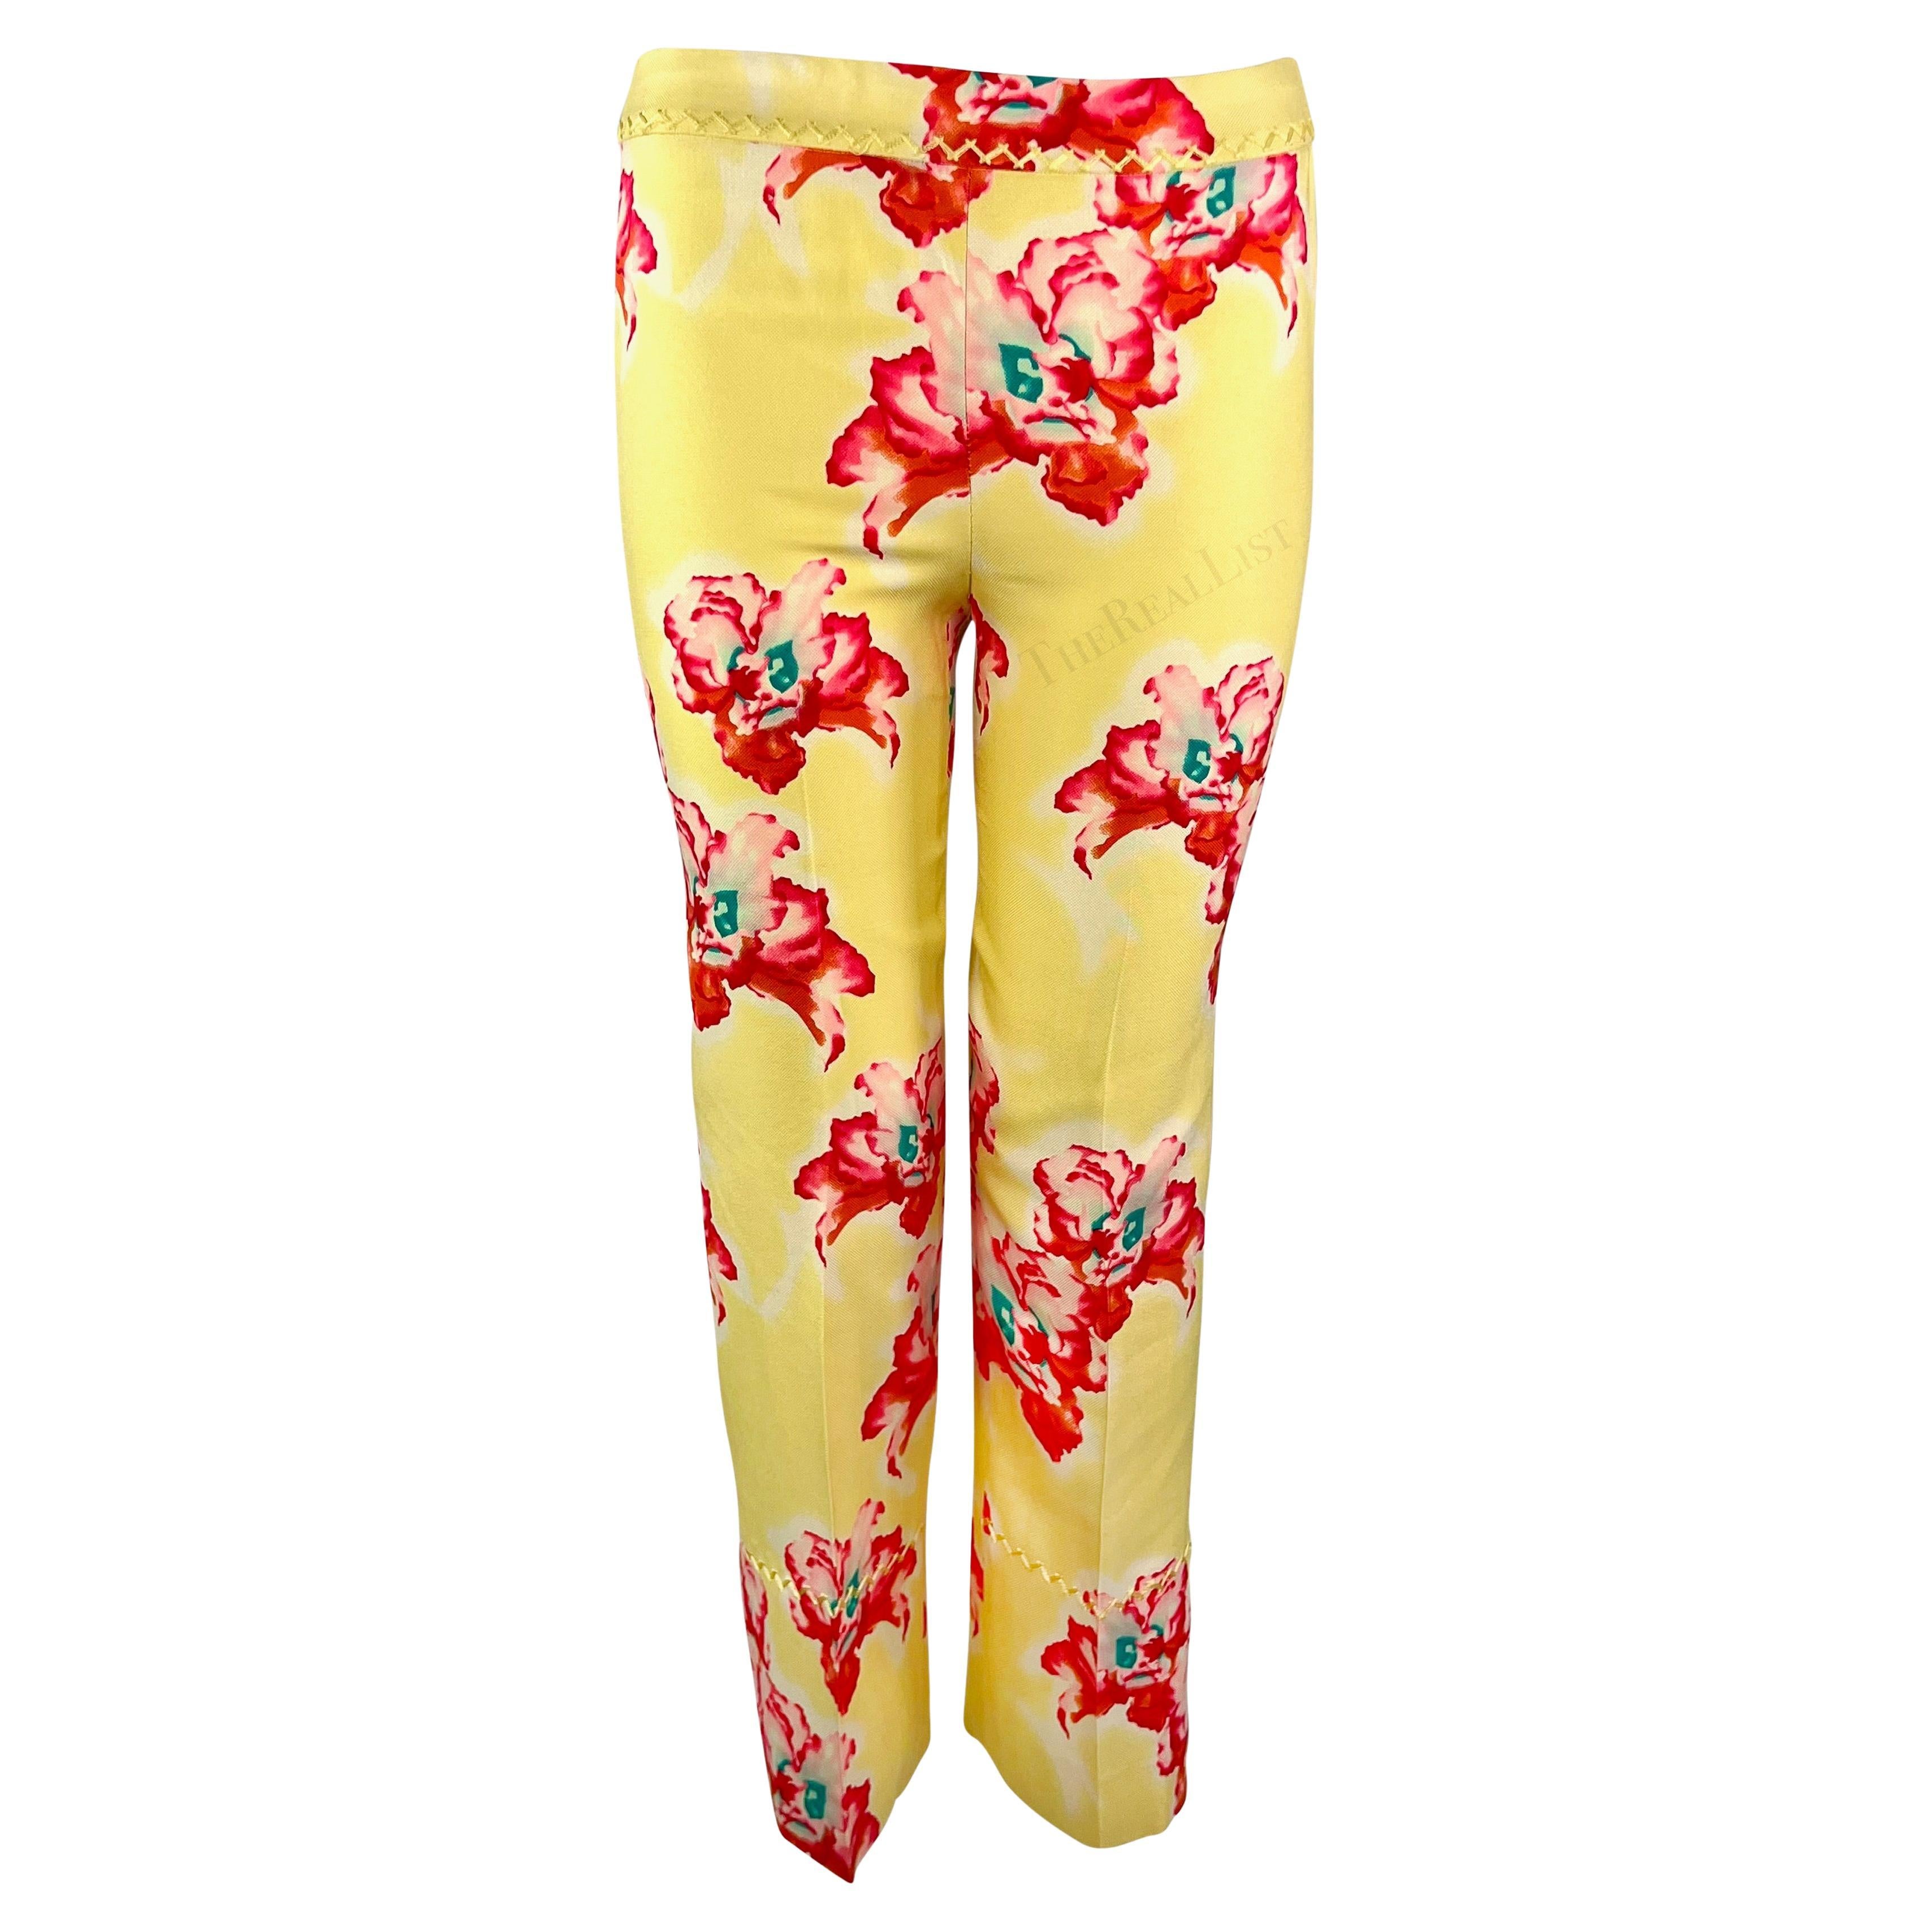 S/S 1999 Gianni Versace by Donatella Pink Yellow Orchid Print Silk Cropped Pants For Sale